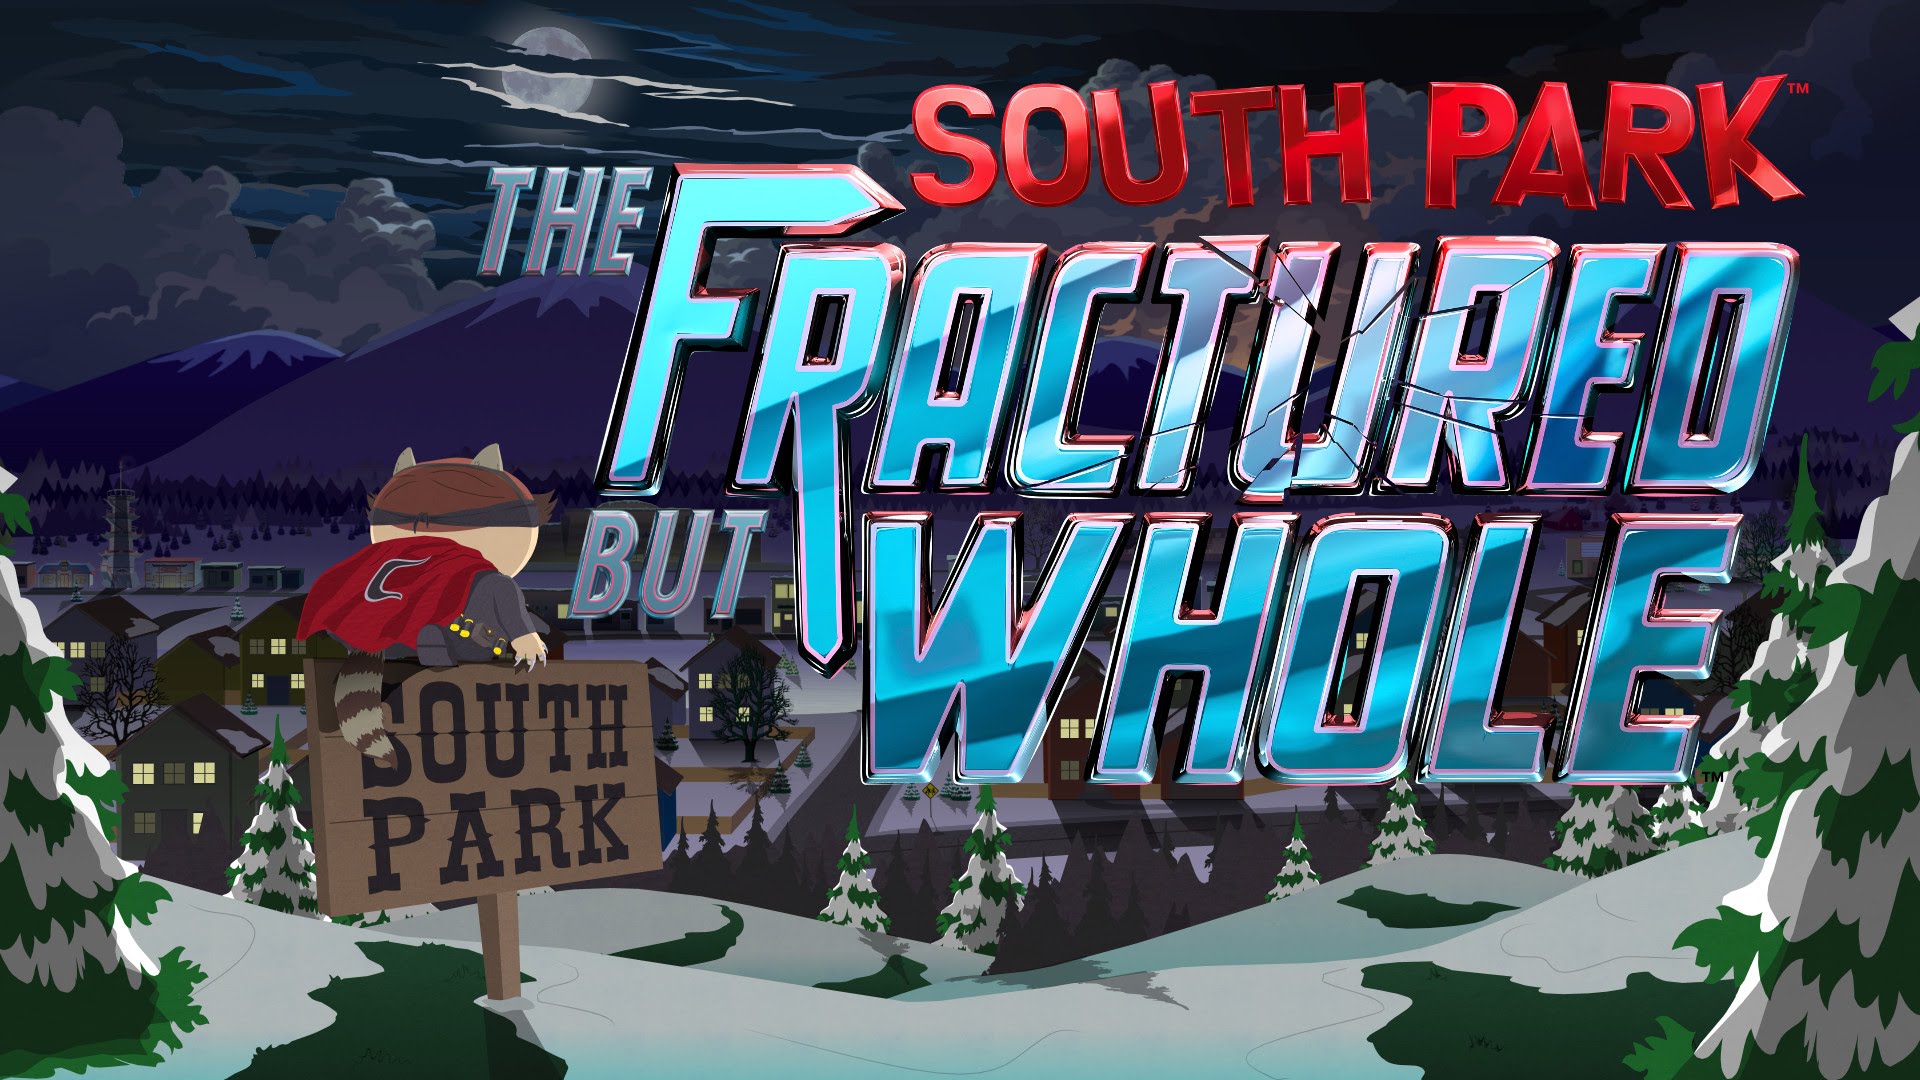 South Park: The Fractured But Whole - 3/31